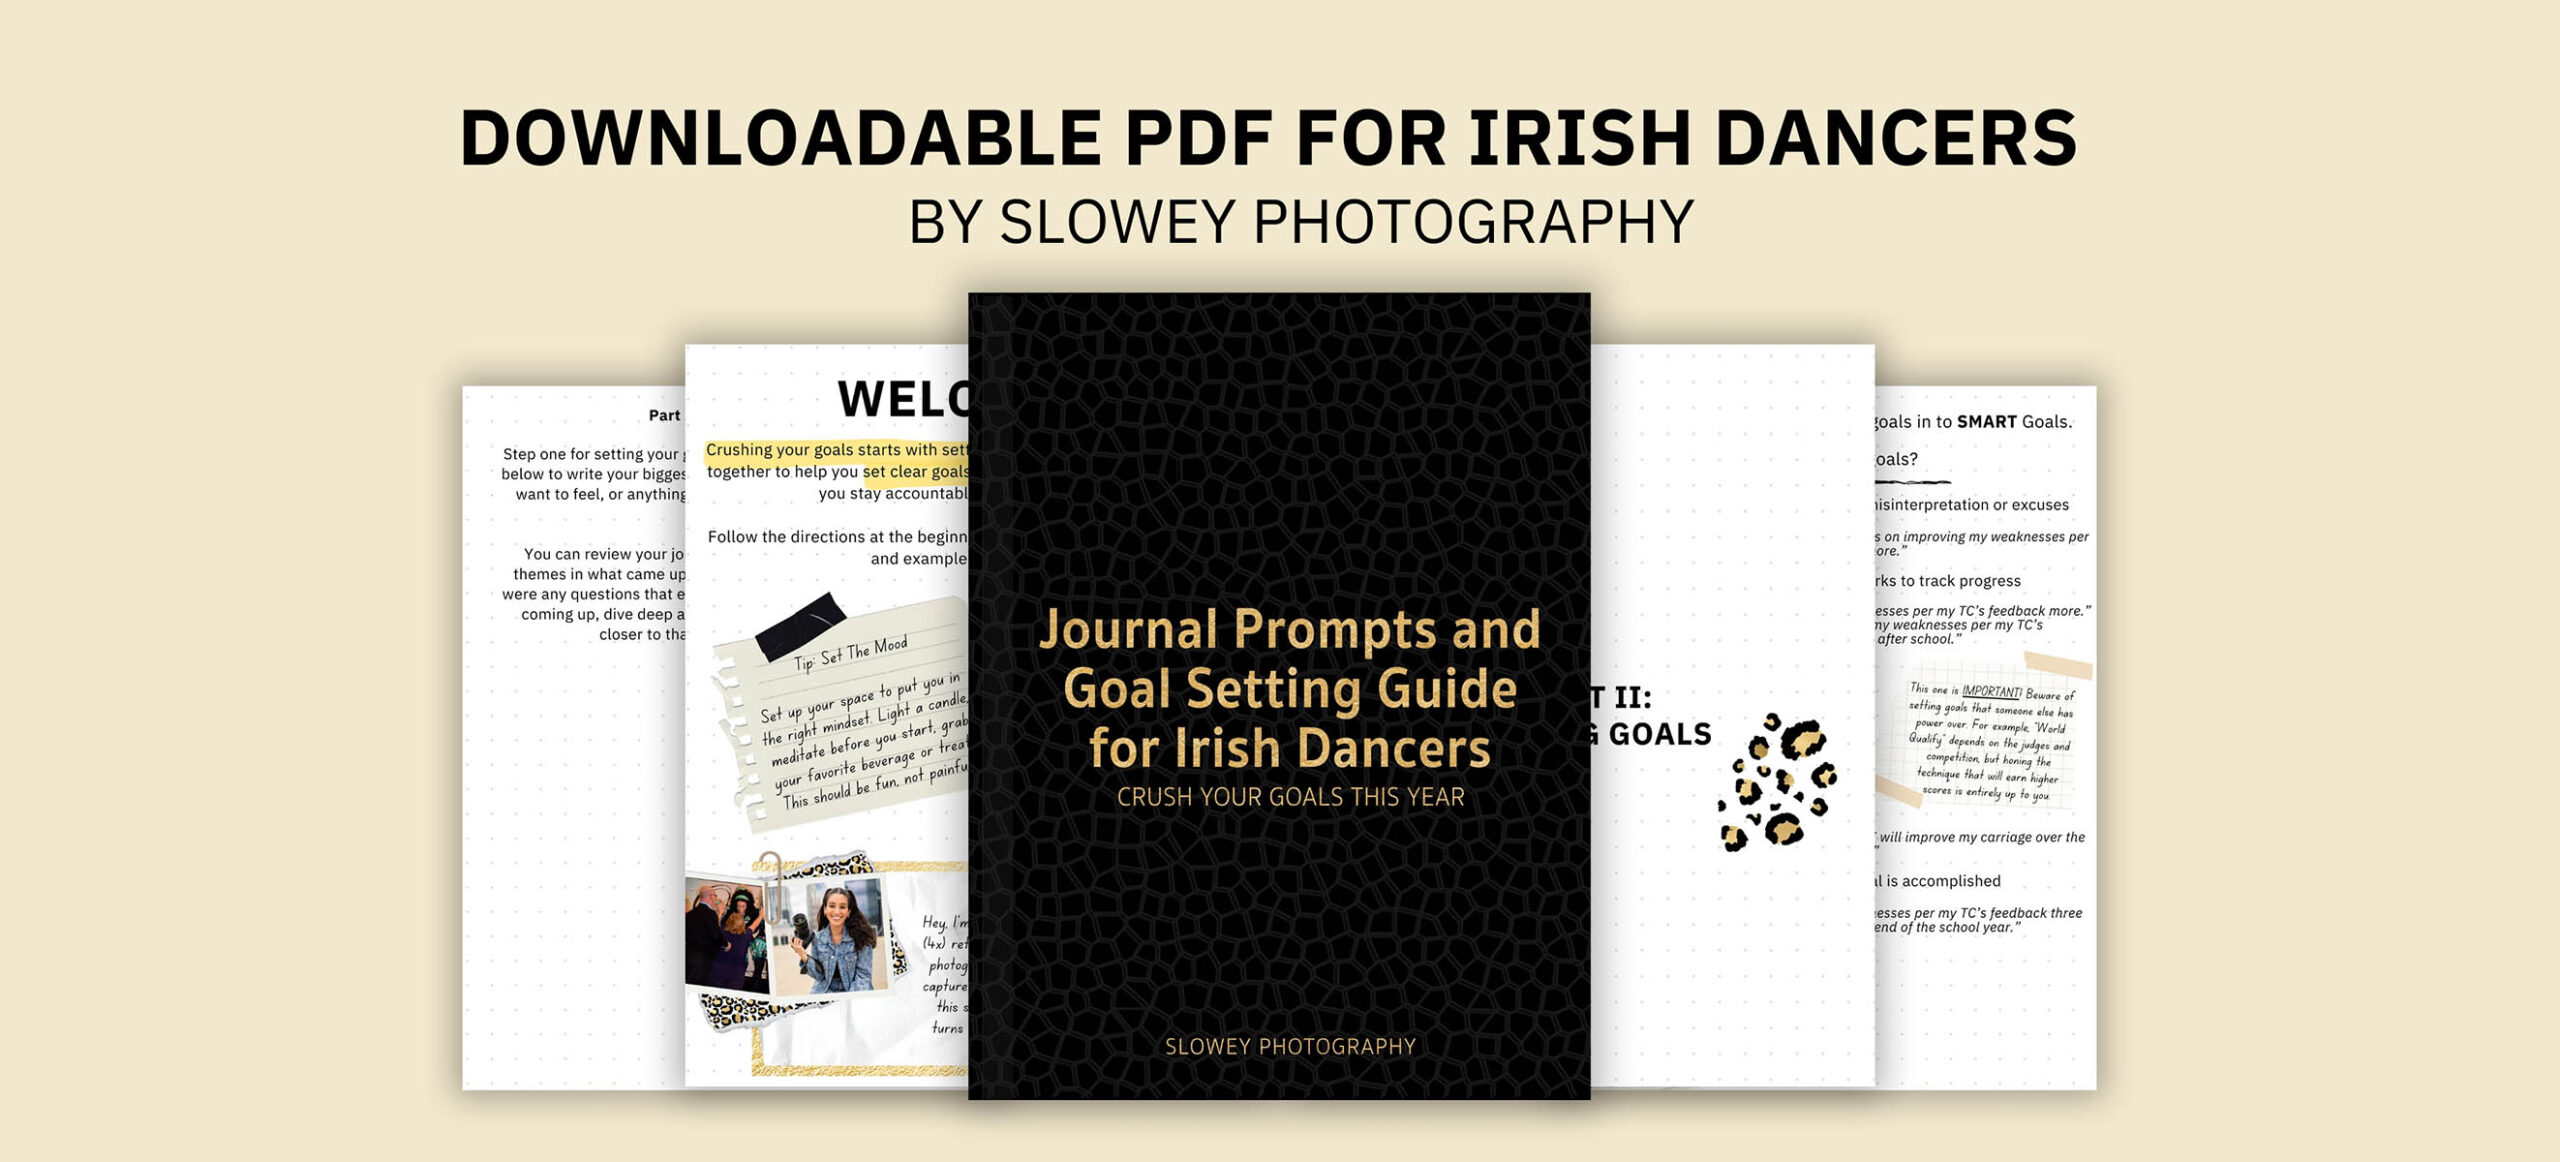 Goal Setting Guide PDF download for Irish Dancers by Slowey Photography